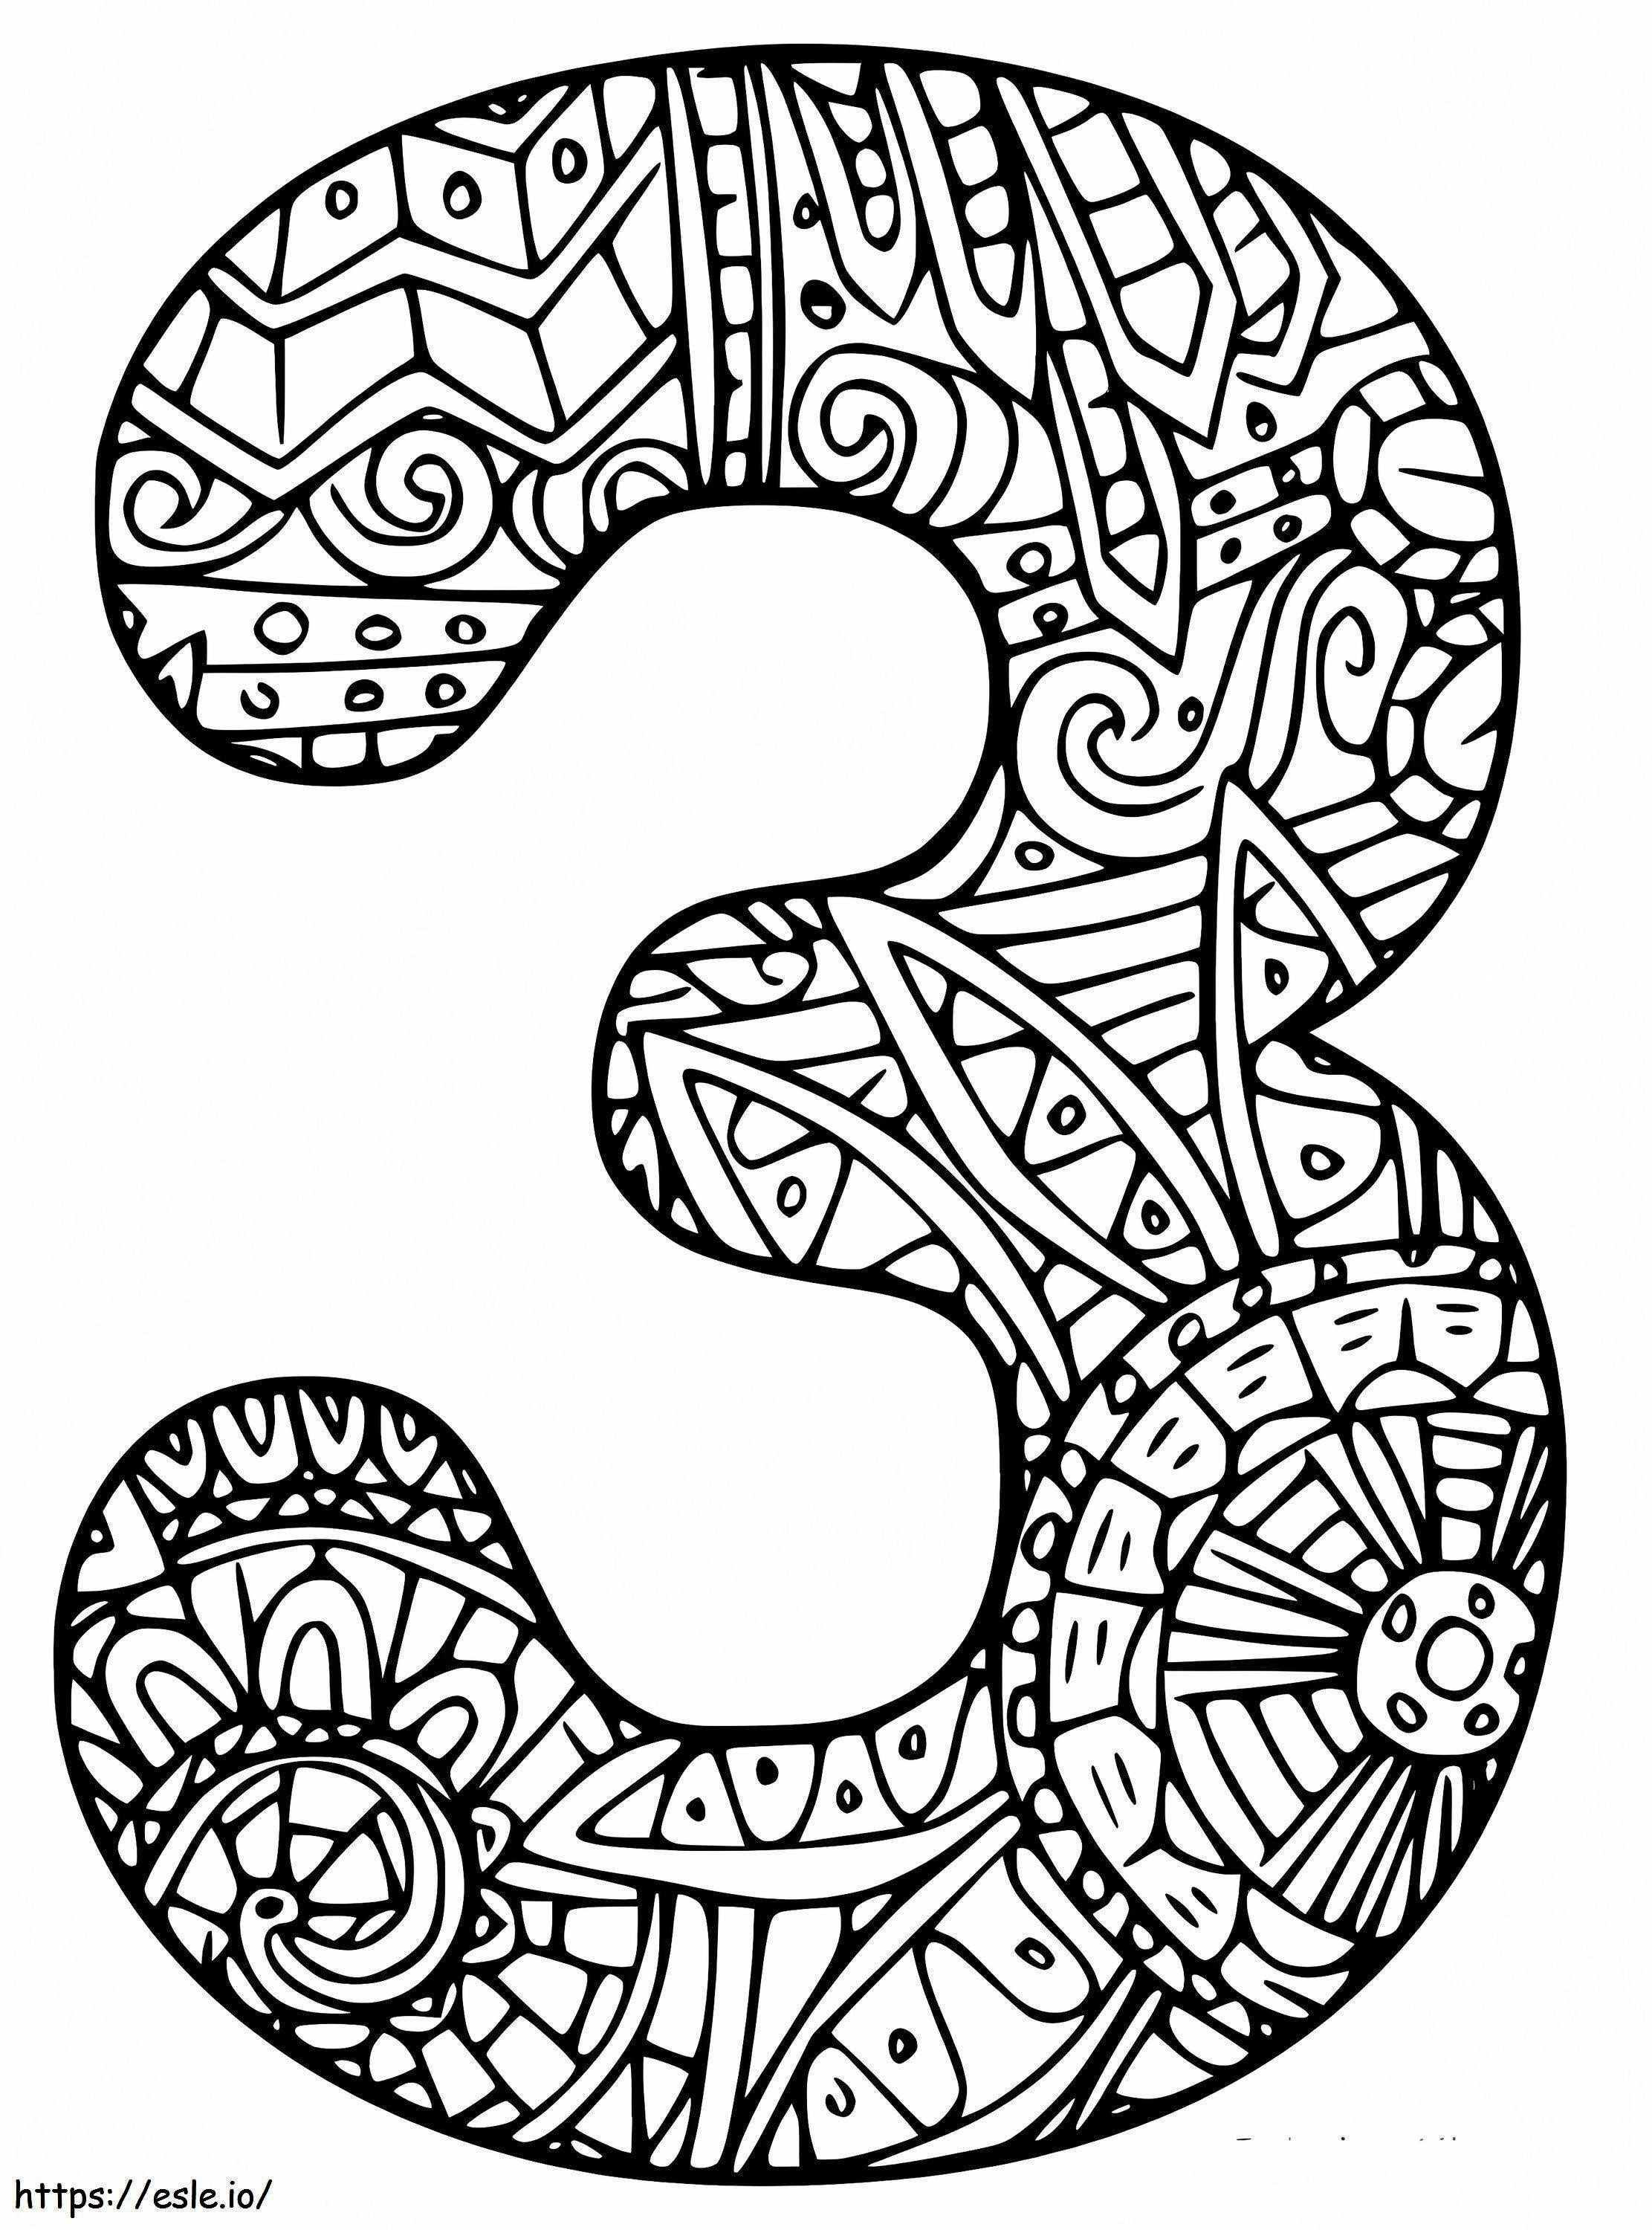 Complex Number 3 coloring page